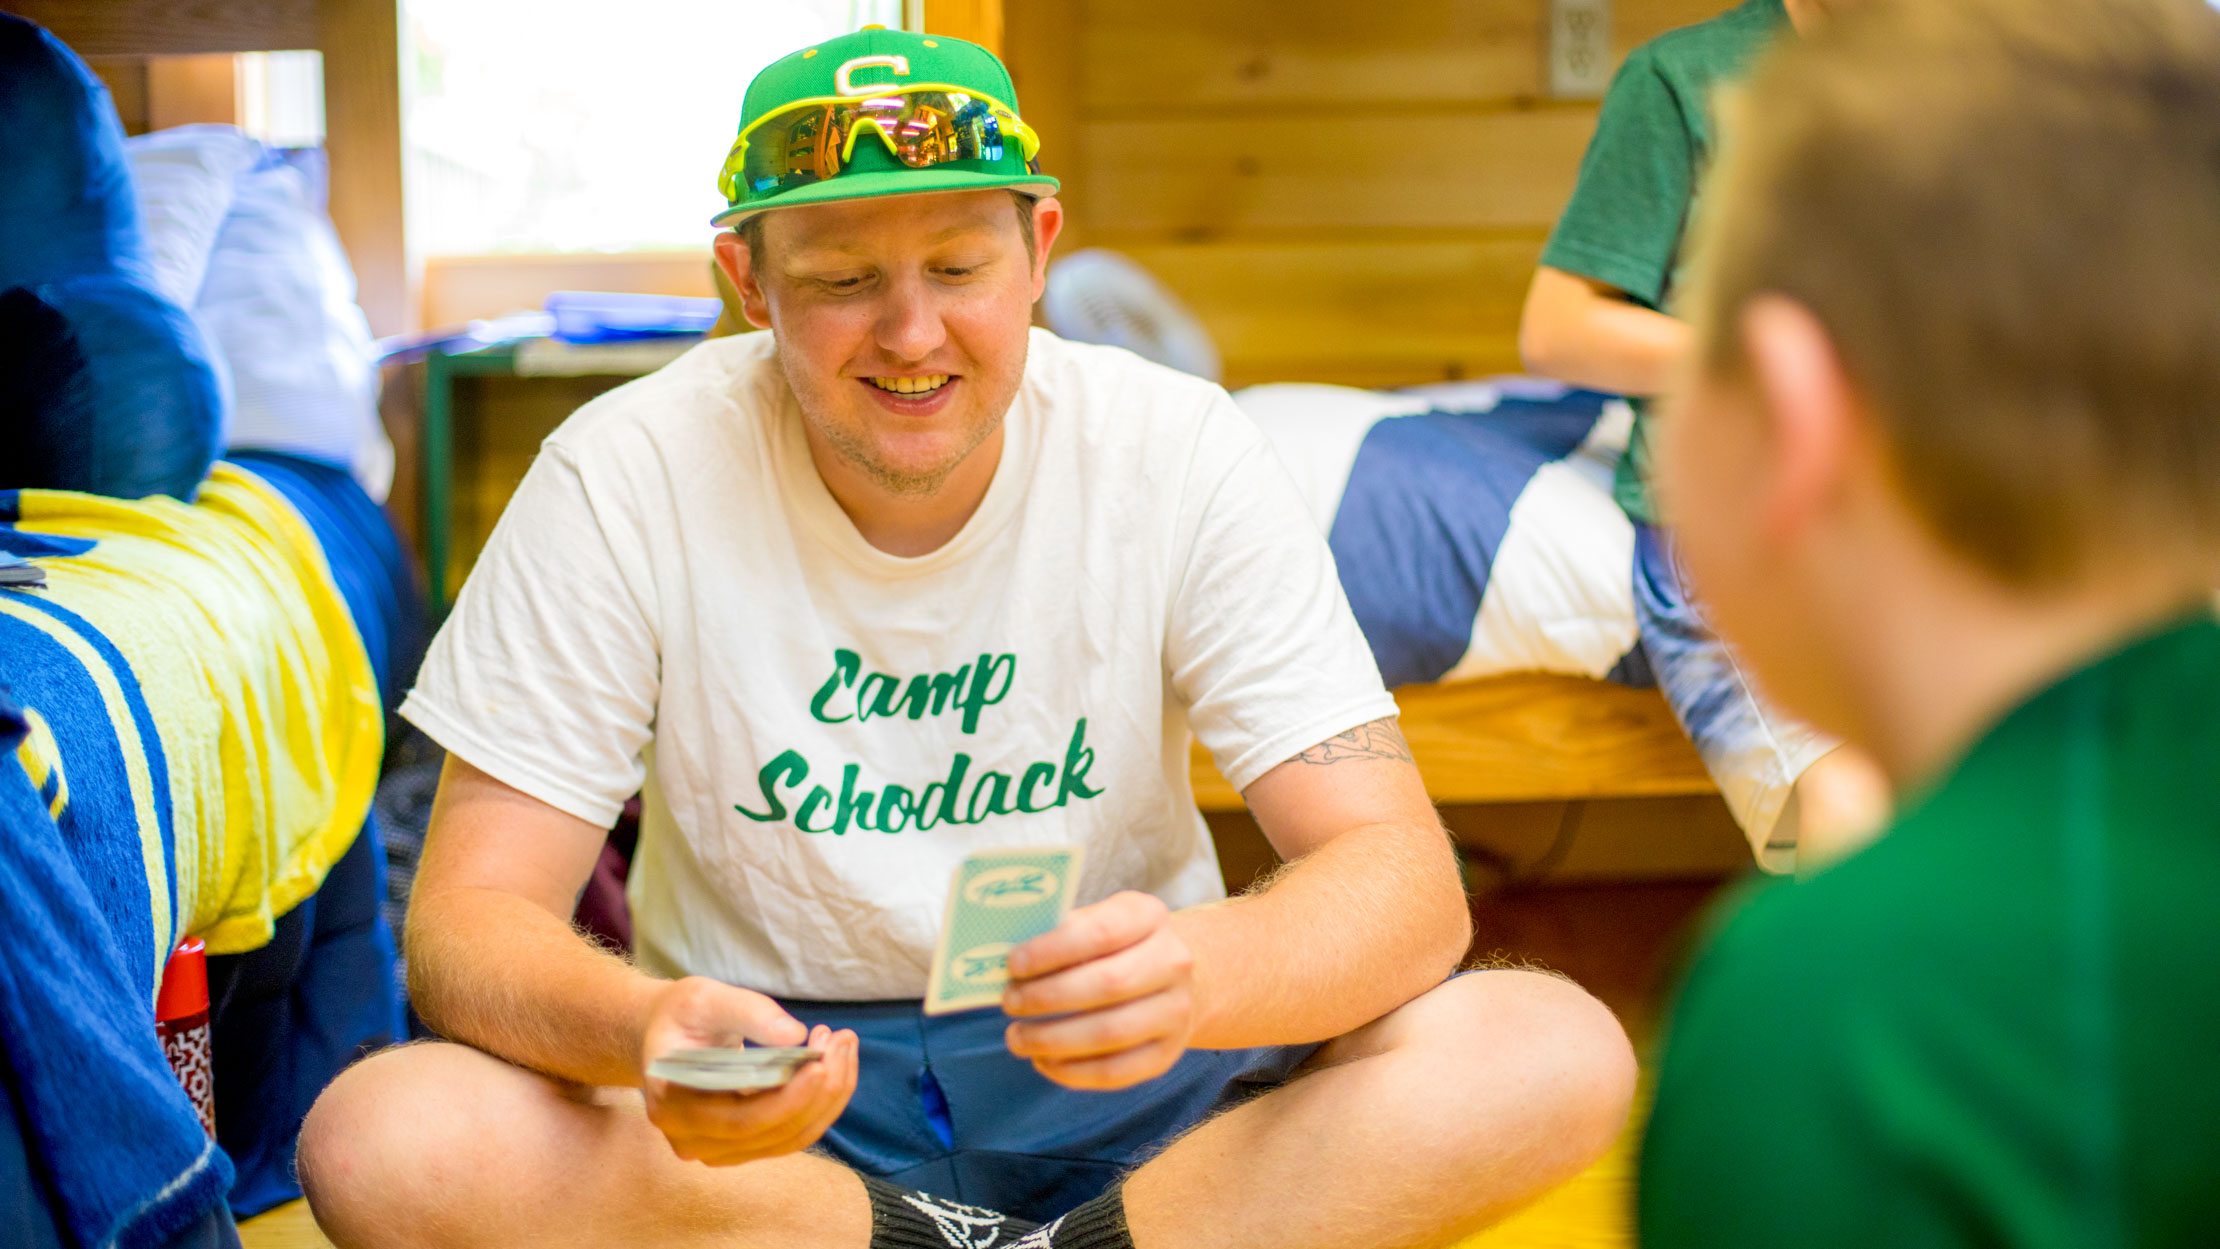 Counselor playing cards with campers in cabin